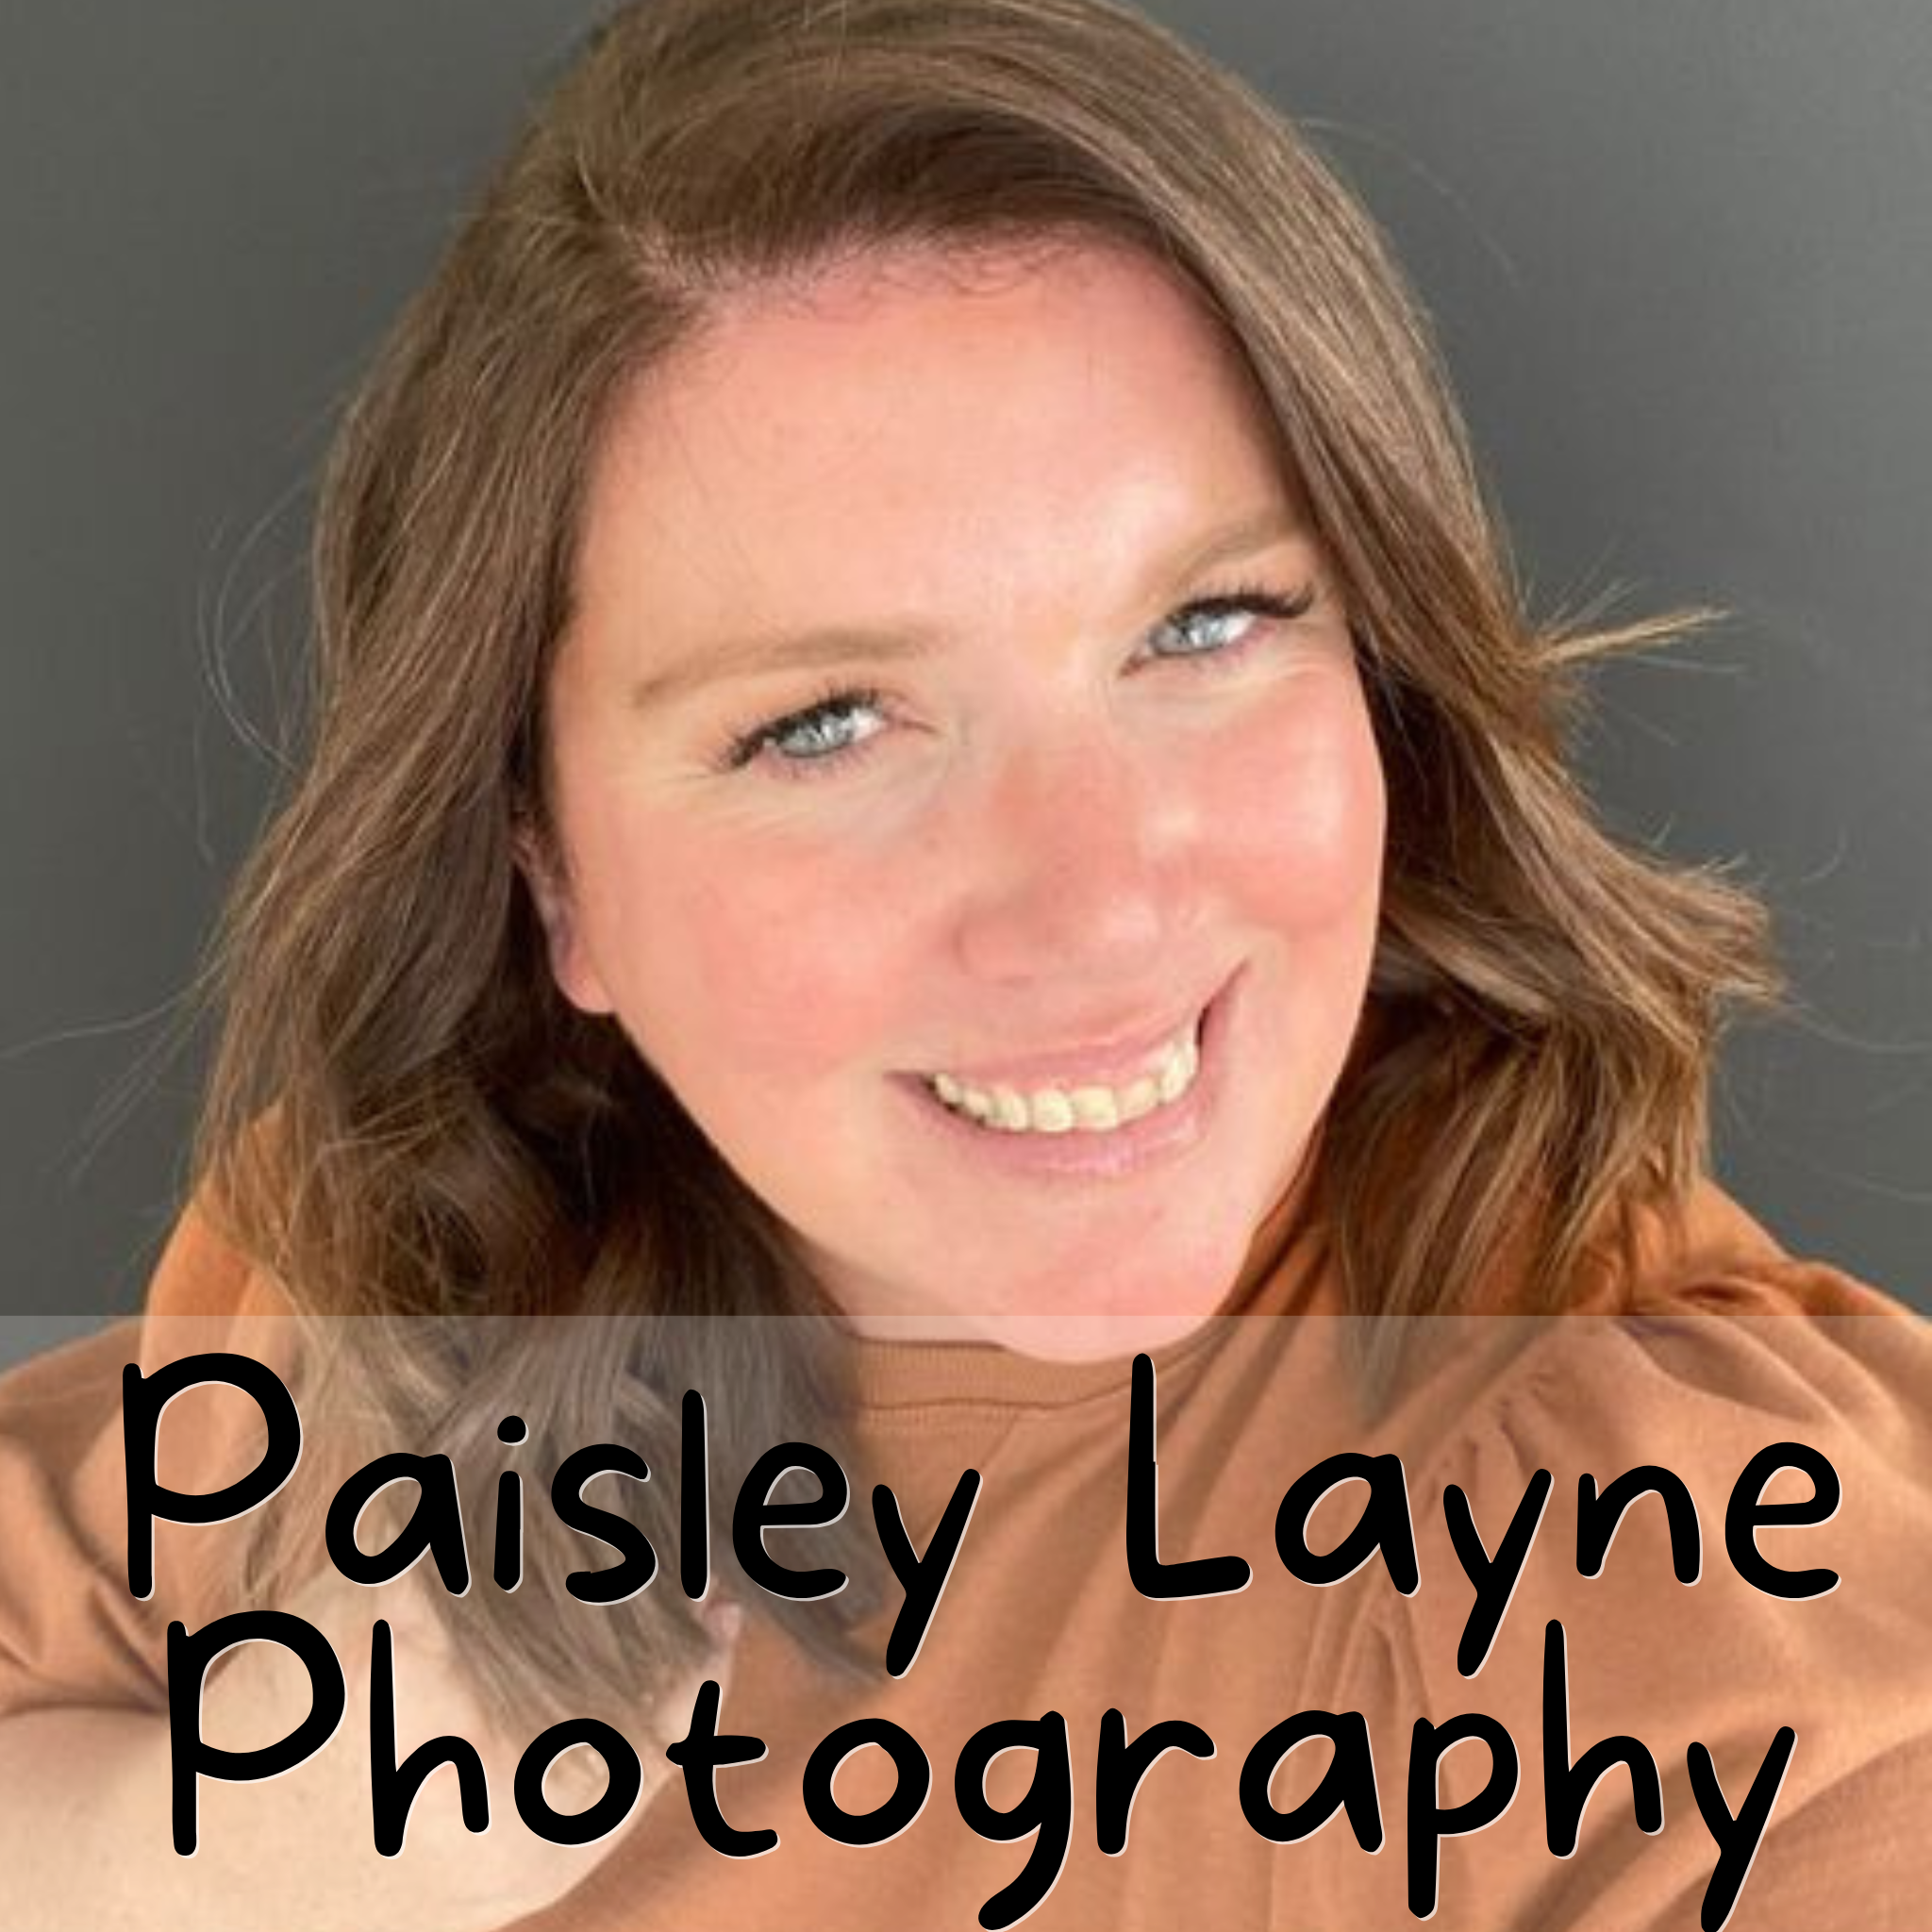 Photo of Kendra, owner and founder of Paisley Layne Photography who took photographs of Lindsay Dain and her self published teacher focused books created on Amazon KDP and Kindle Direct Publishing